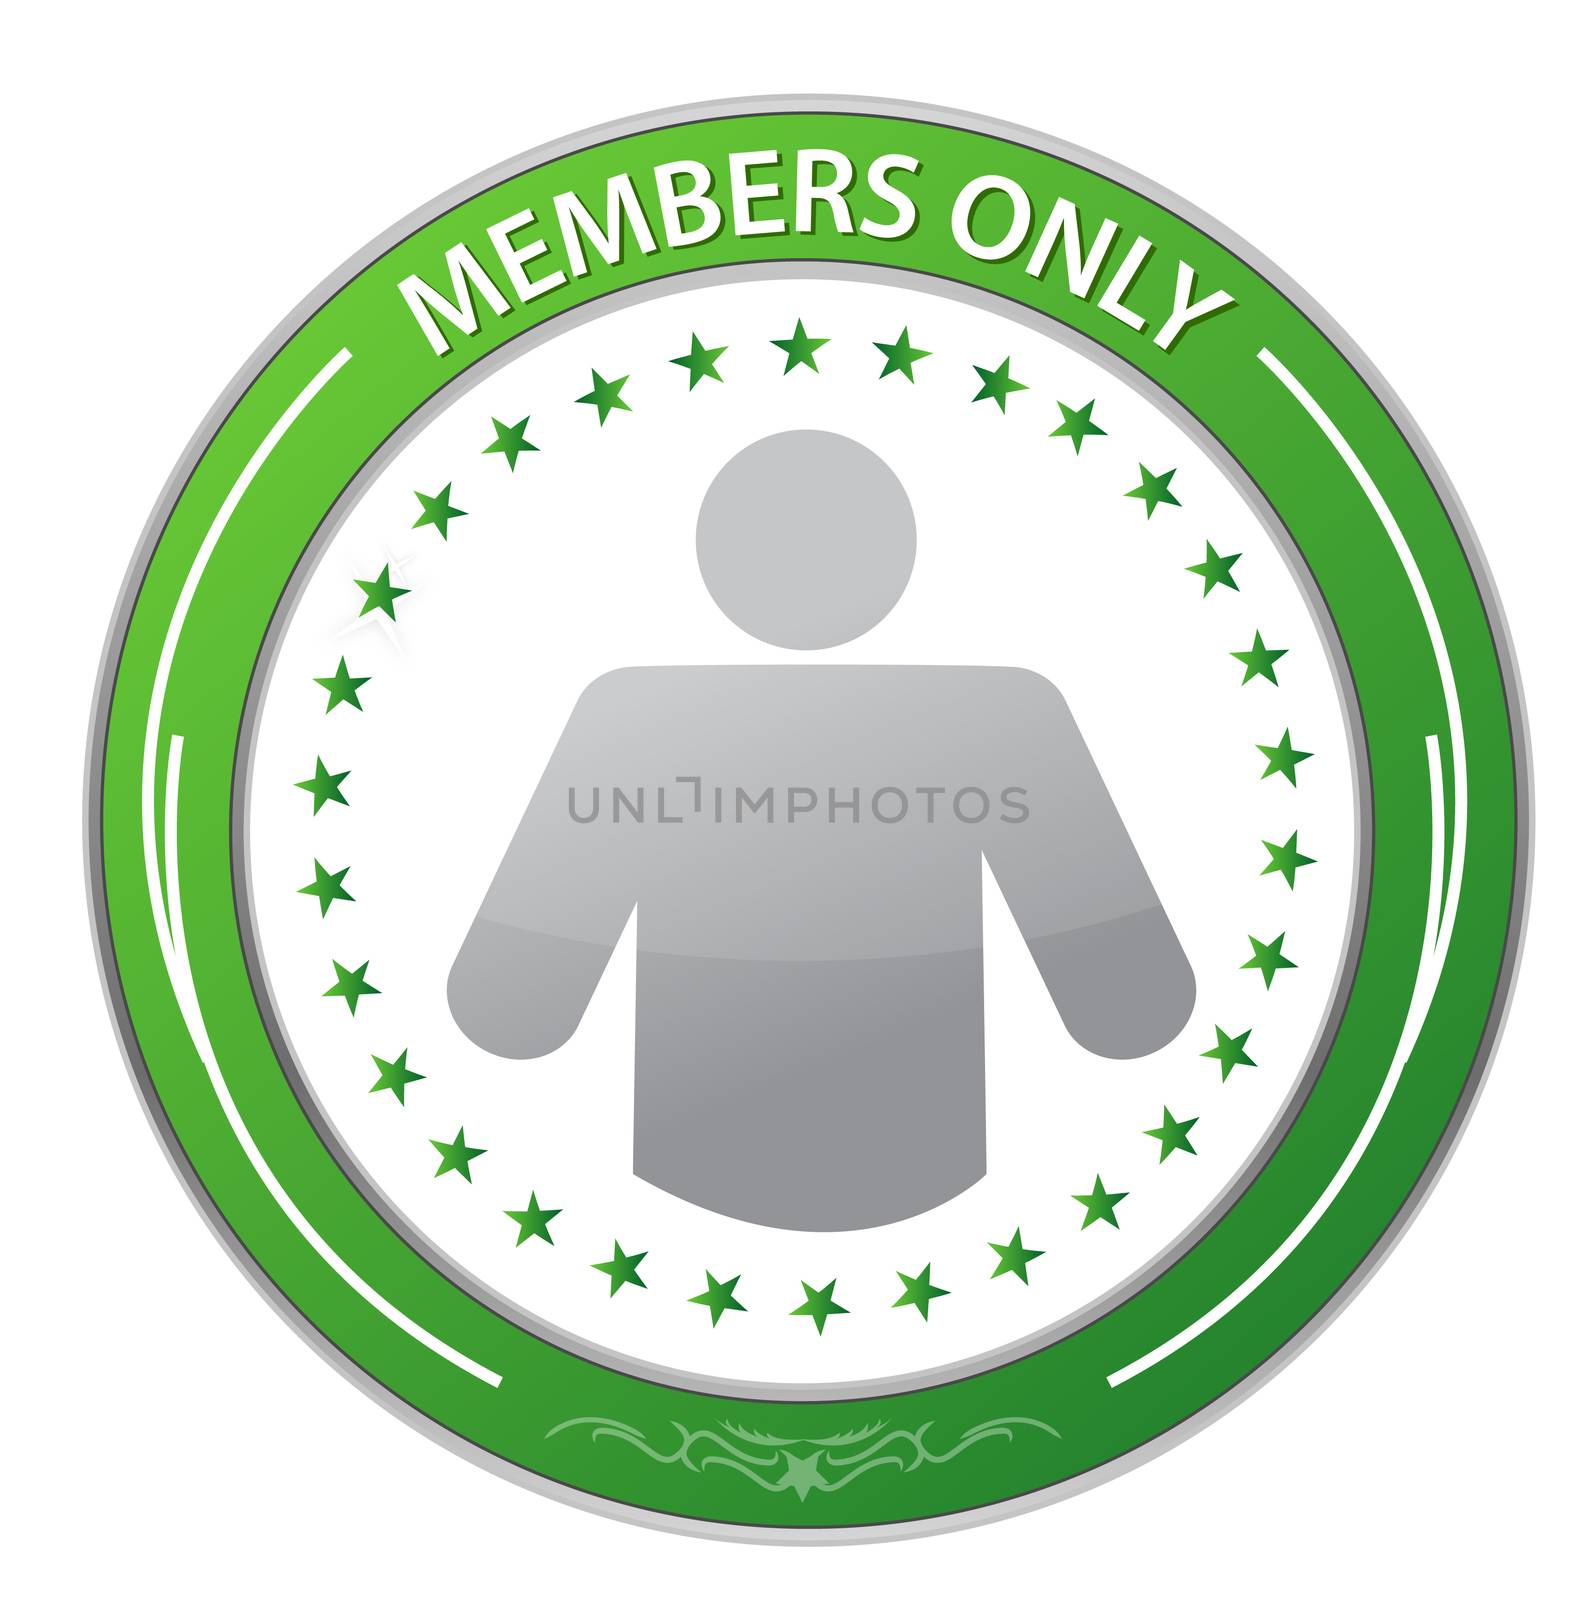 Members Only Circle Stamp illustration design over white